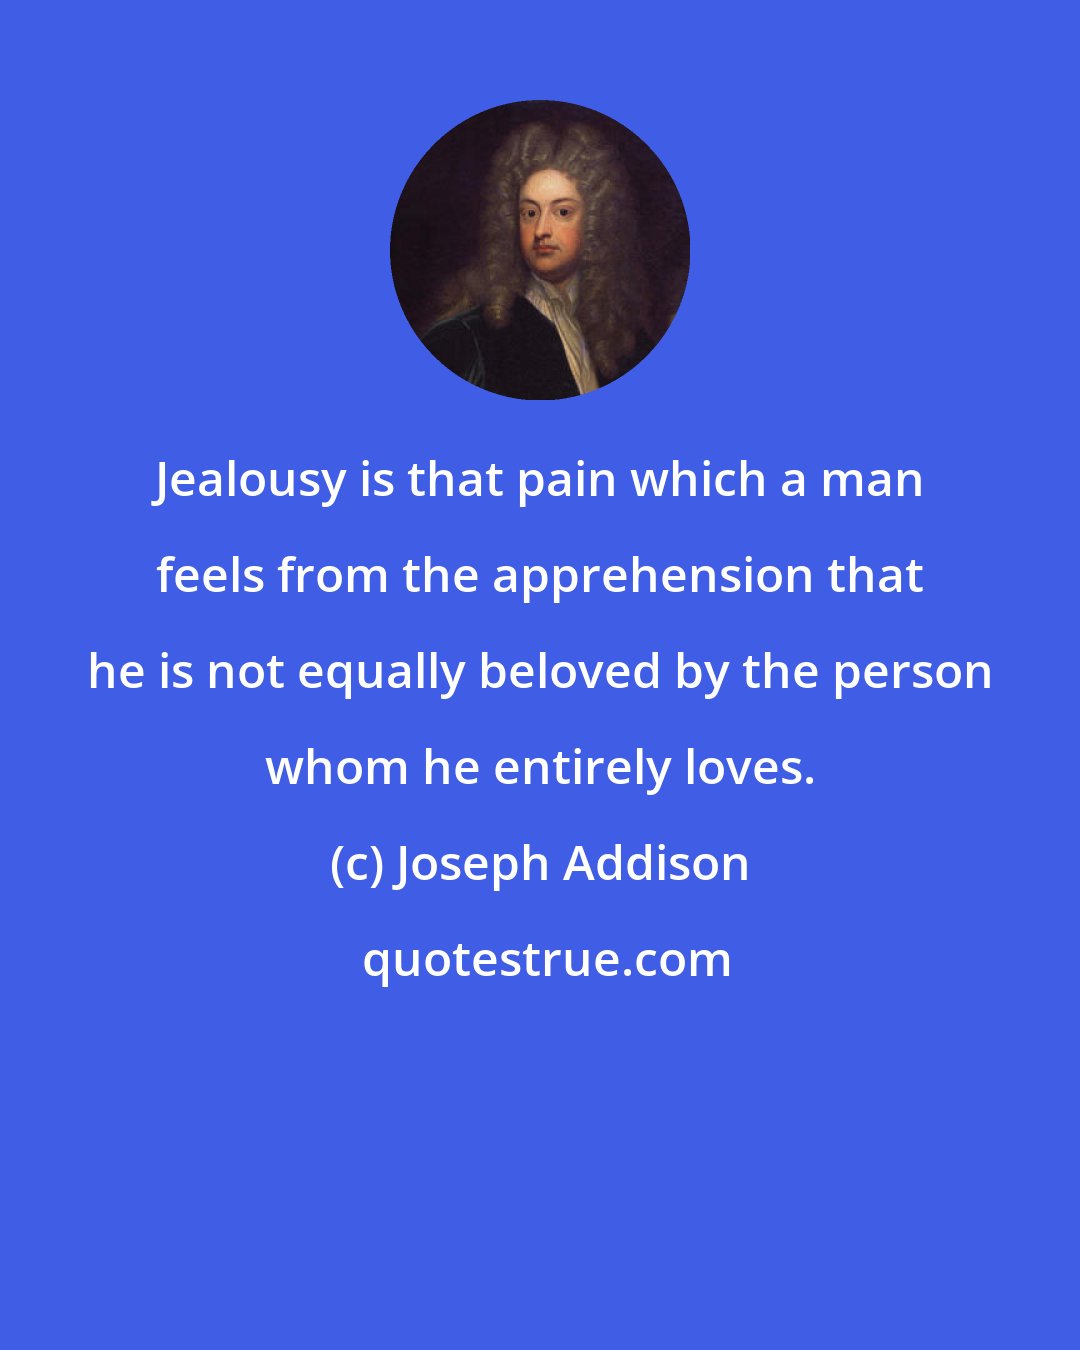 Joseph Addison: Jealousy is that pain which a man feels from the apprehension that he is not equally beloved by the person whom he entirely loves.